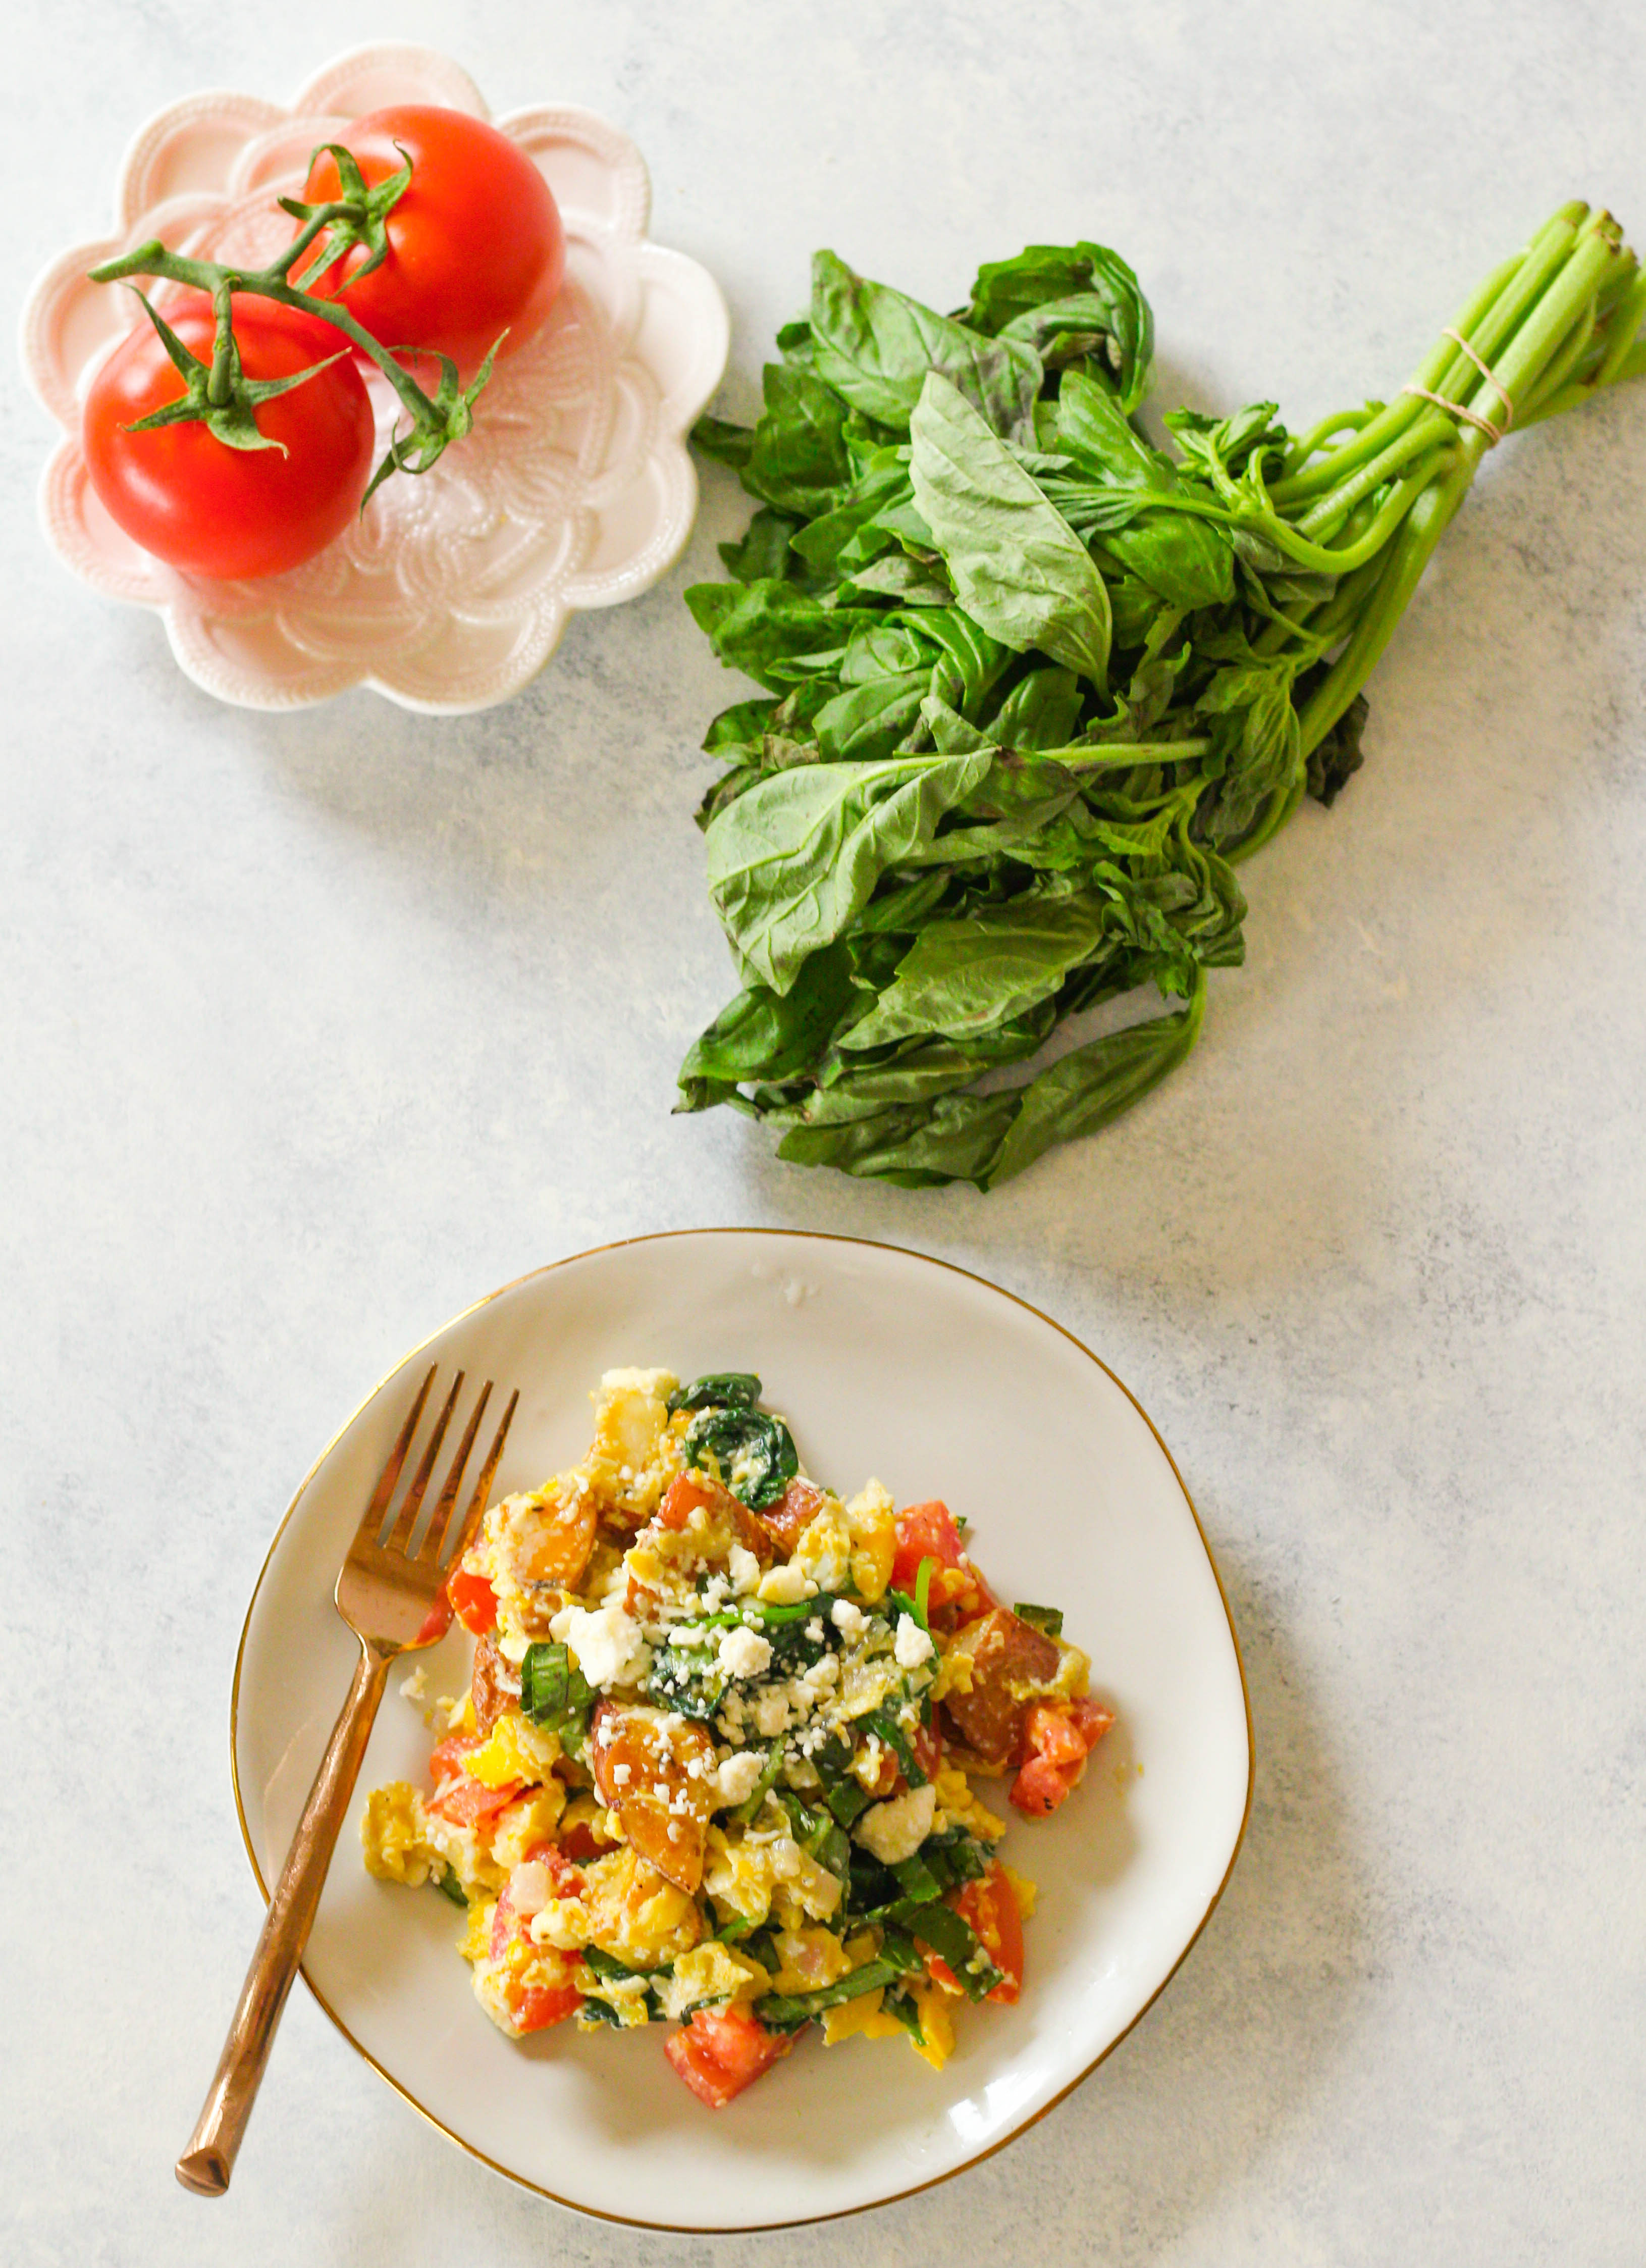 Try this delicious egg scramble: enhance your typical scrambled eggs with Italian-inspired flavors like basil, feta and fresh tomatoes. Tossed with roasted red potatoes for a hearty meal!